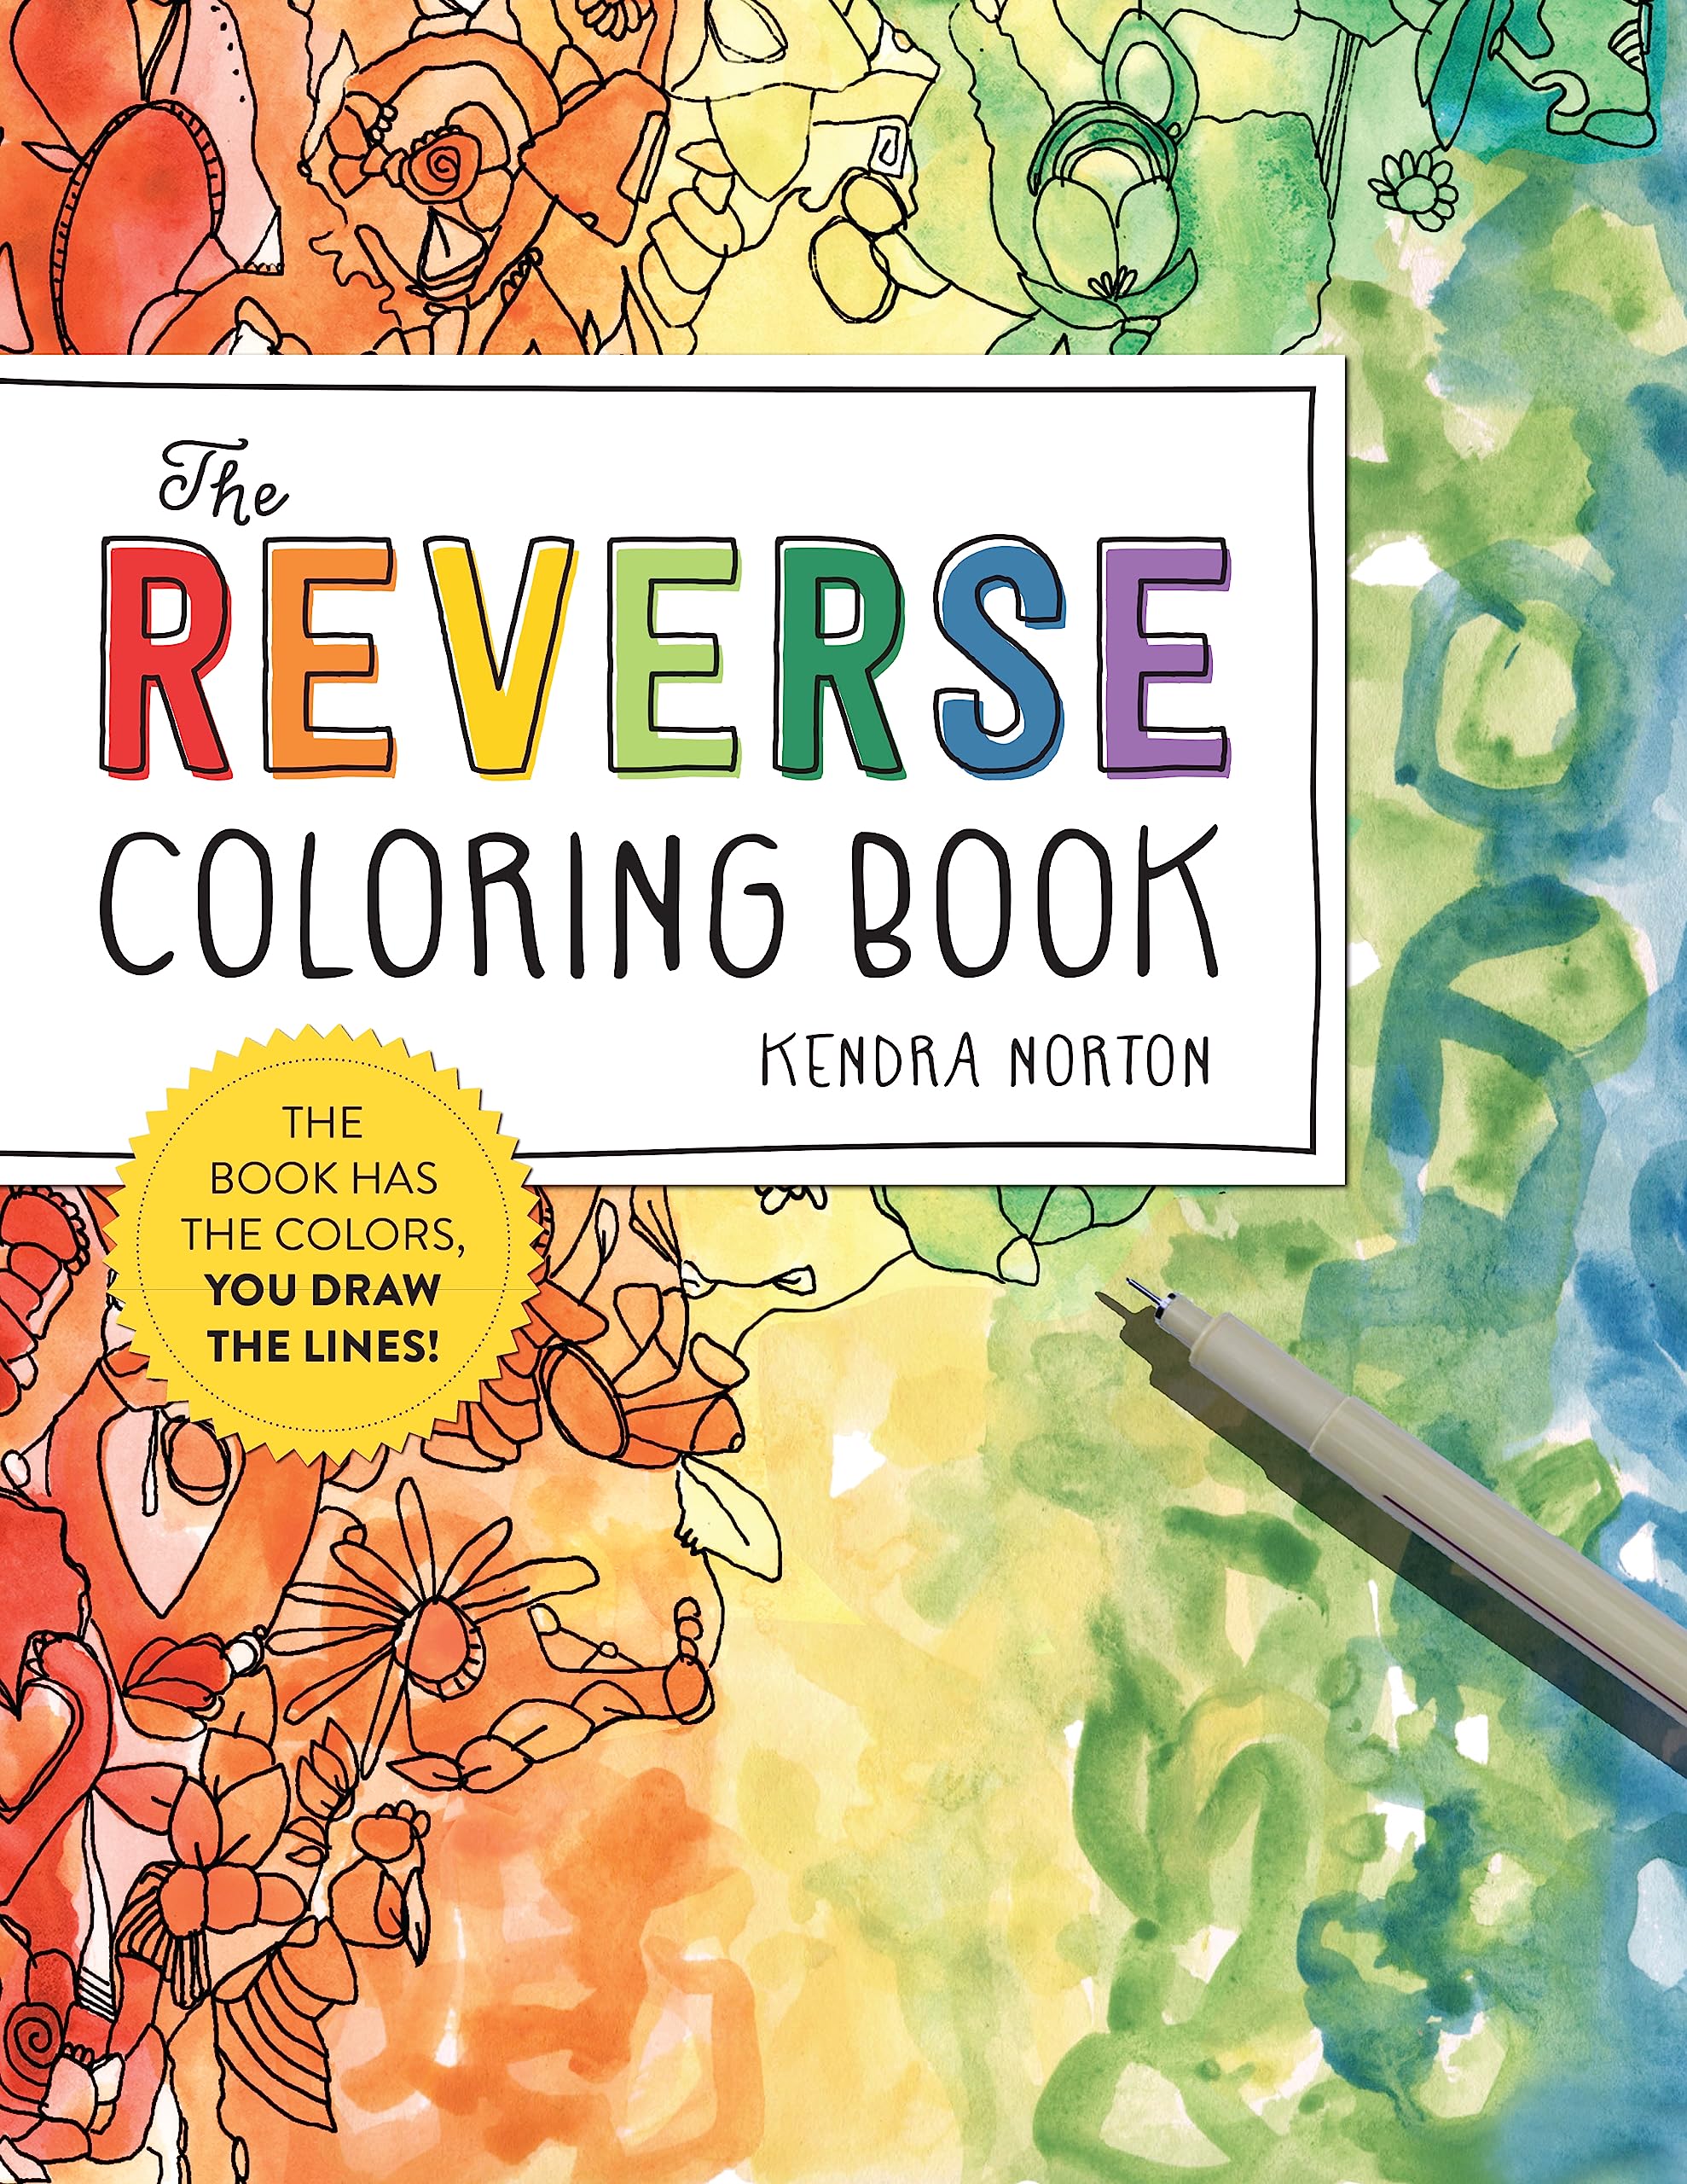 The Reverse Coloring Book(tm): The Book Has the Colors, You Draw the Lines